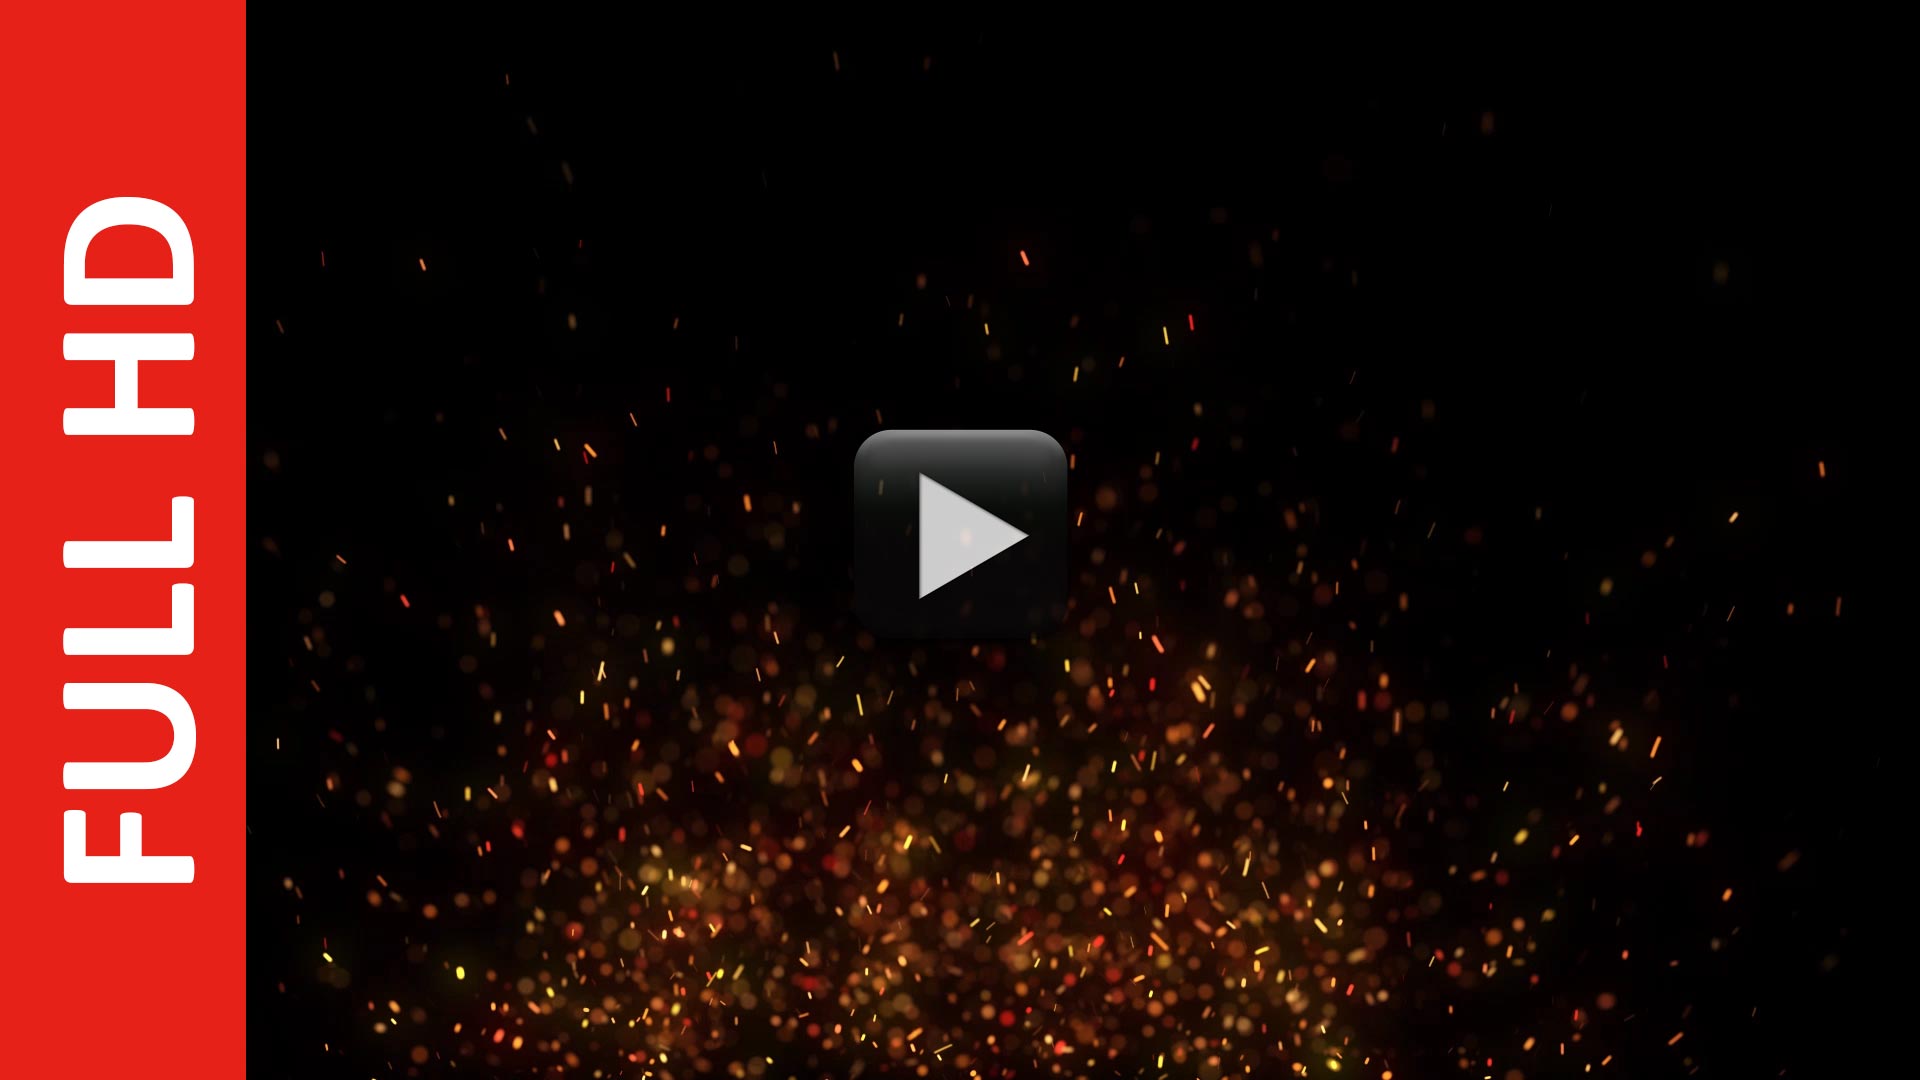 Fire Dust Particles Sparks Black Screen Effects Background Hd 1080p All Design Creative